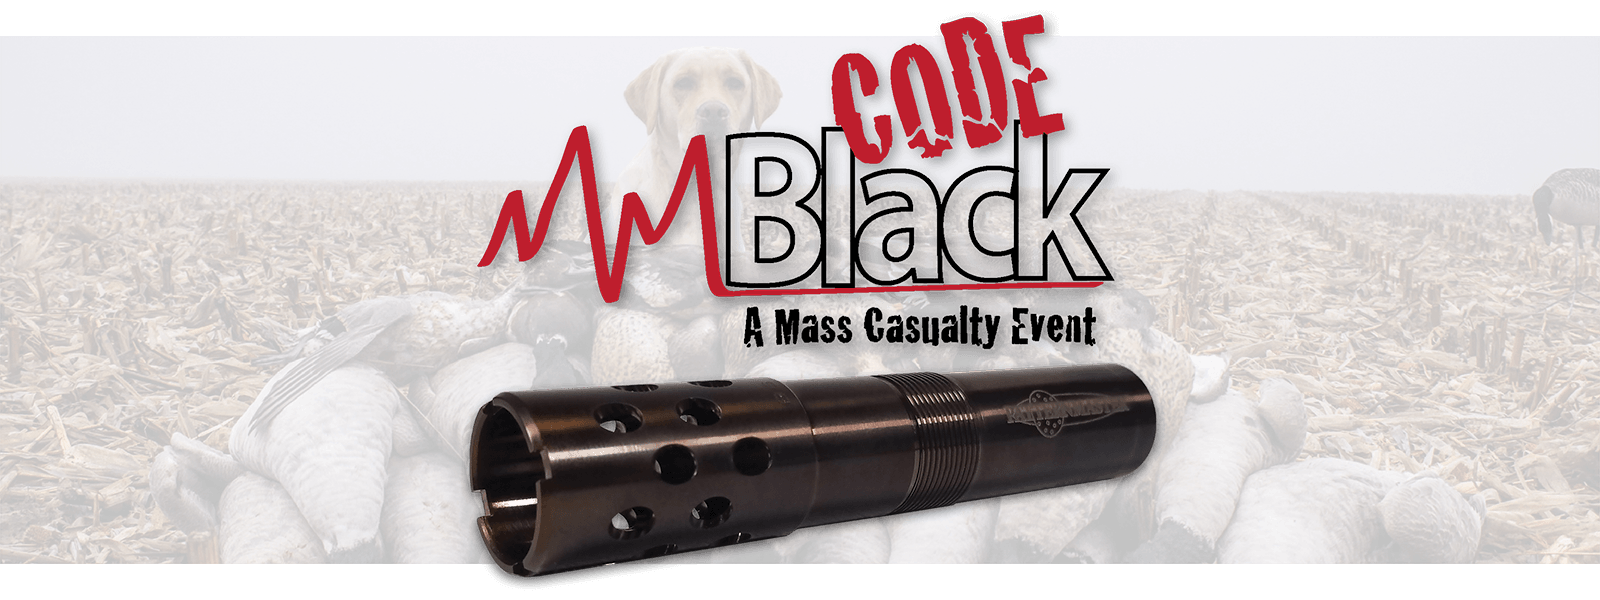 Experience the Code Black Today!